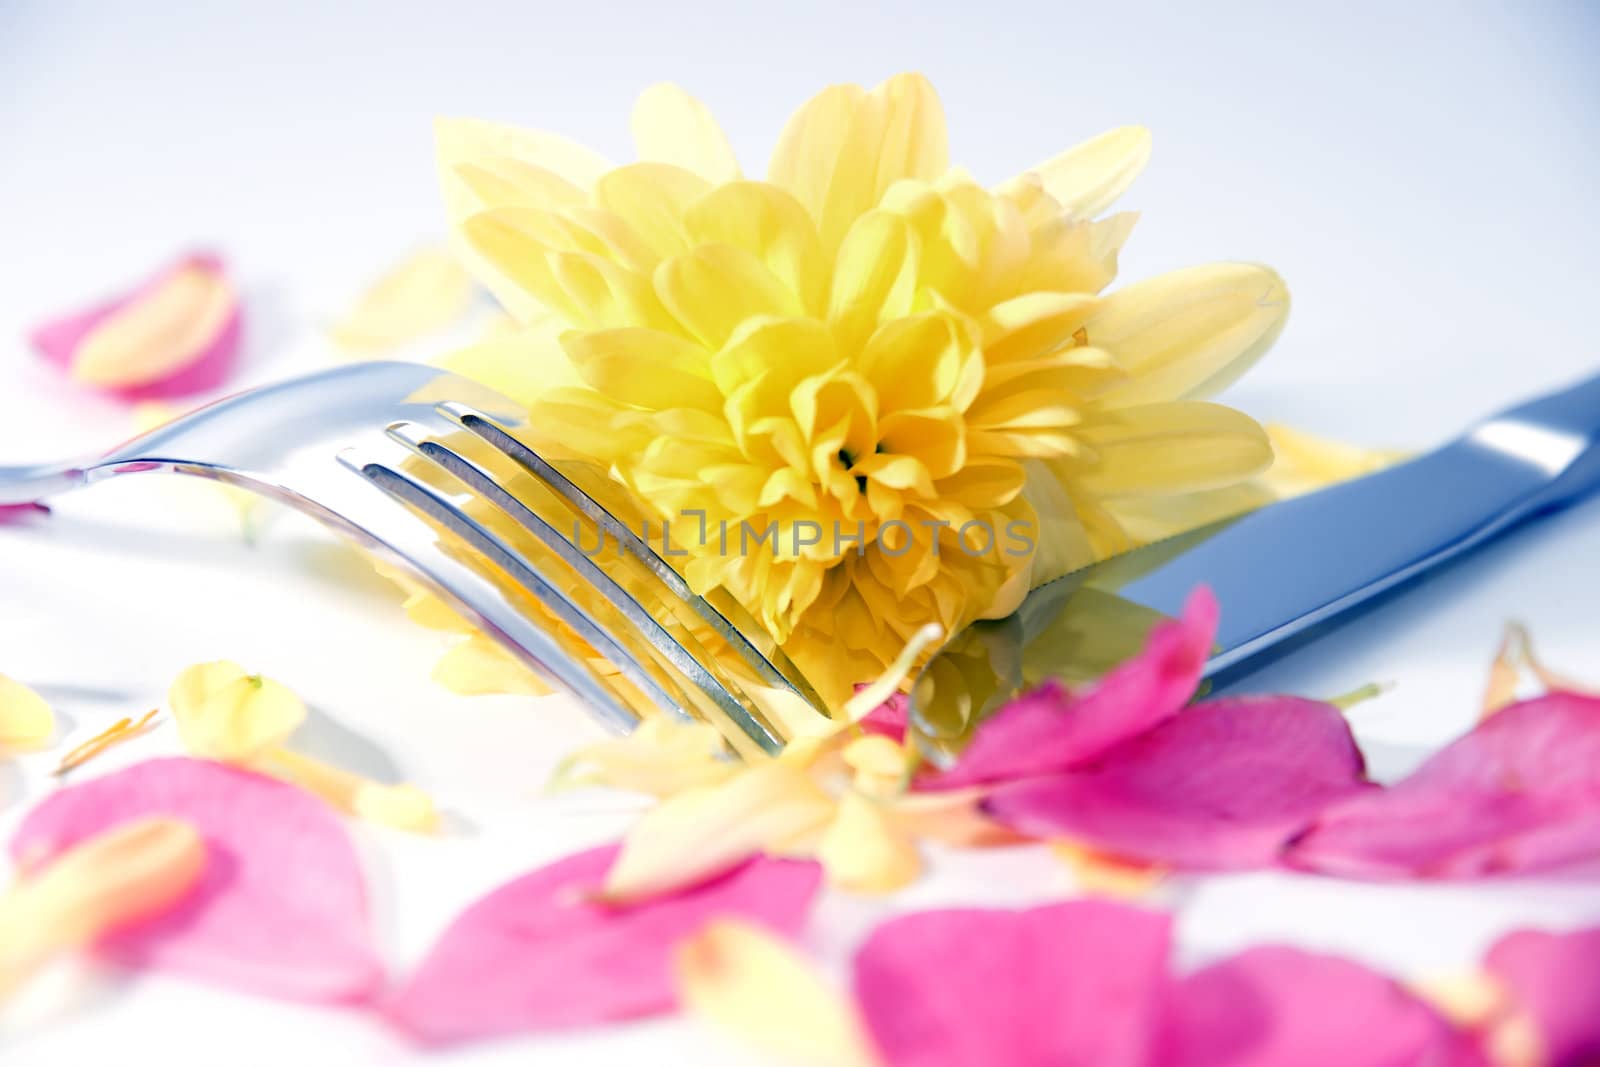 silver knife and fork isolated with dahlia and rose petals by morrbyte